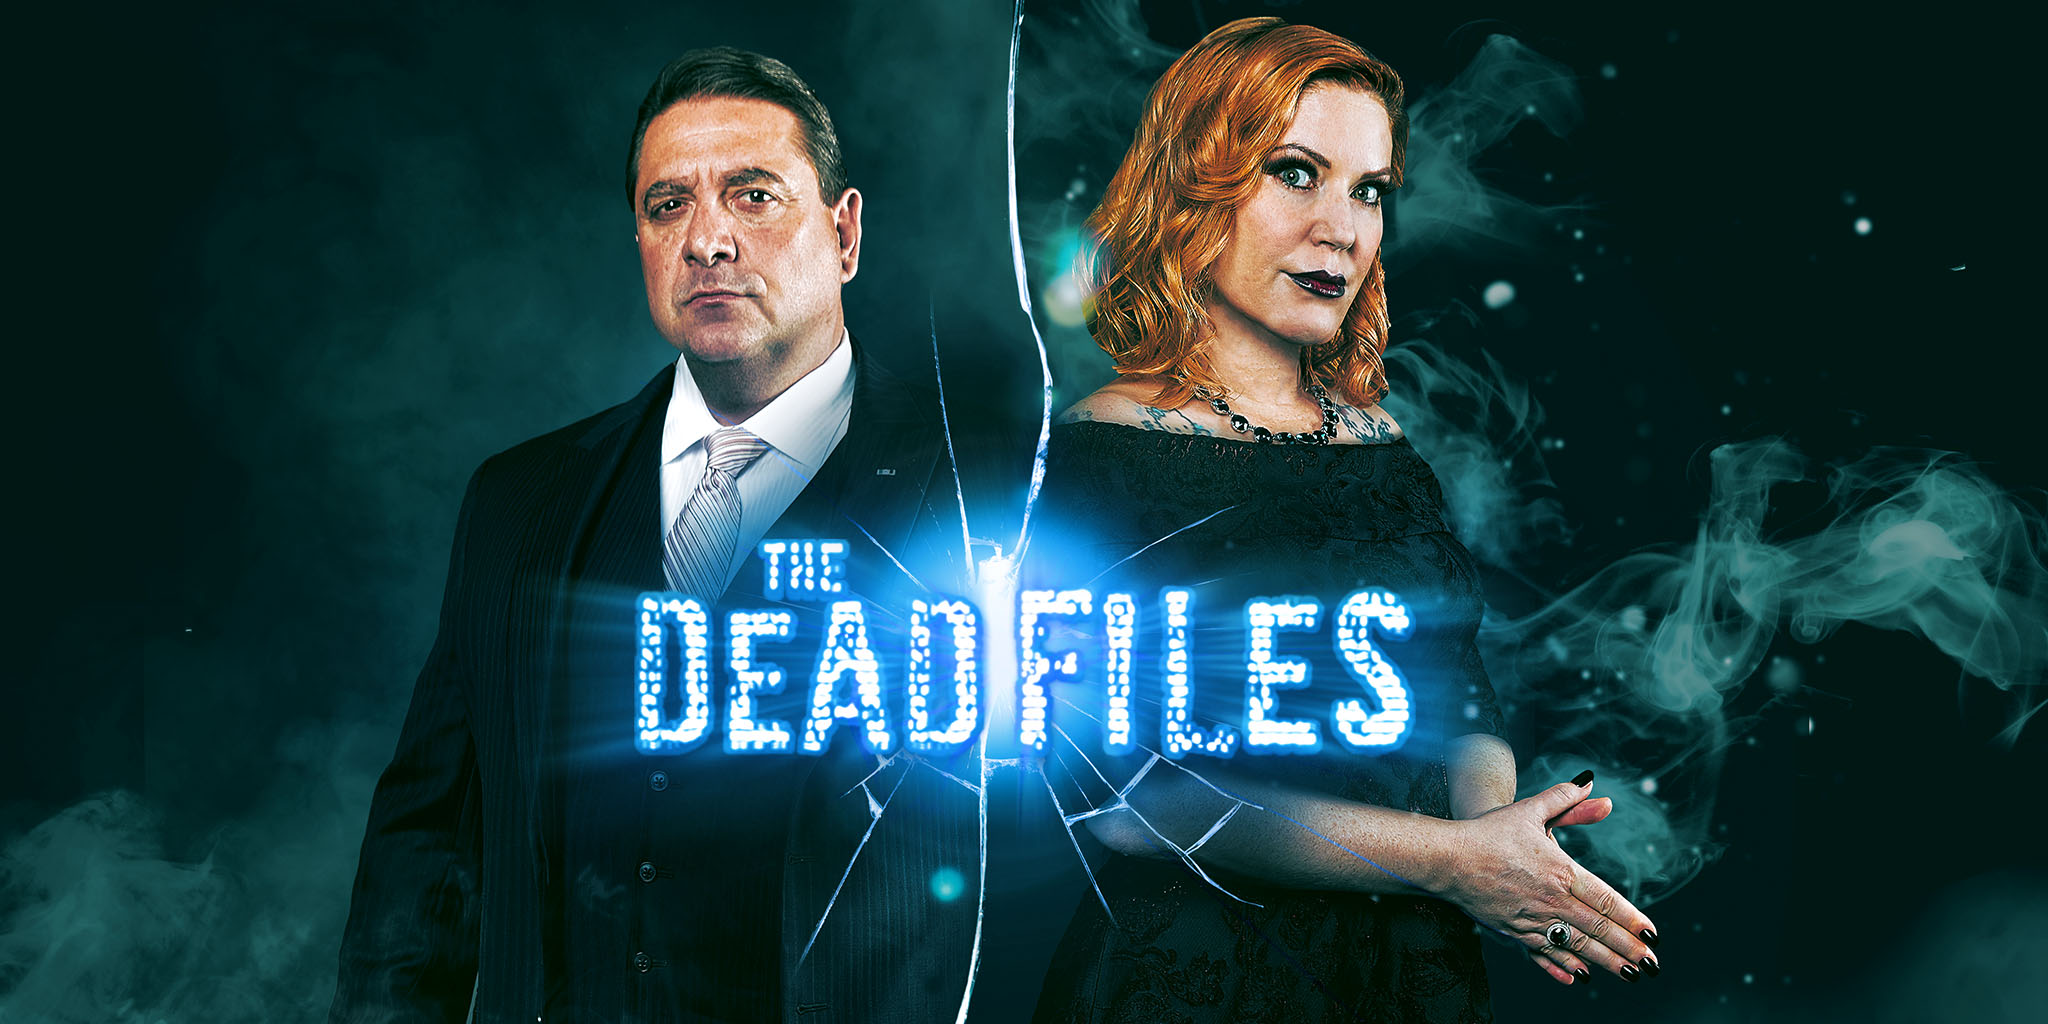 Photo of THE DEAD FILES